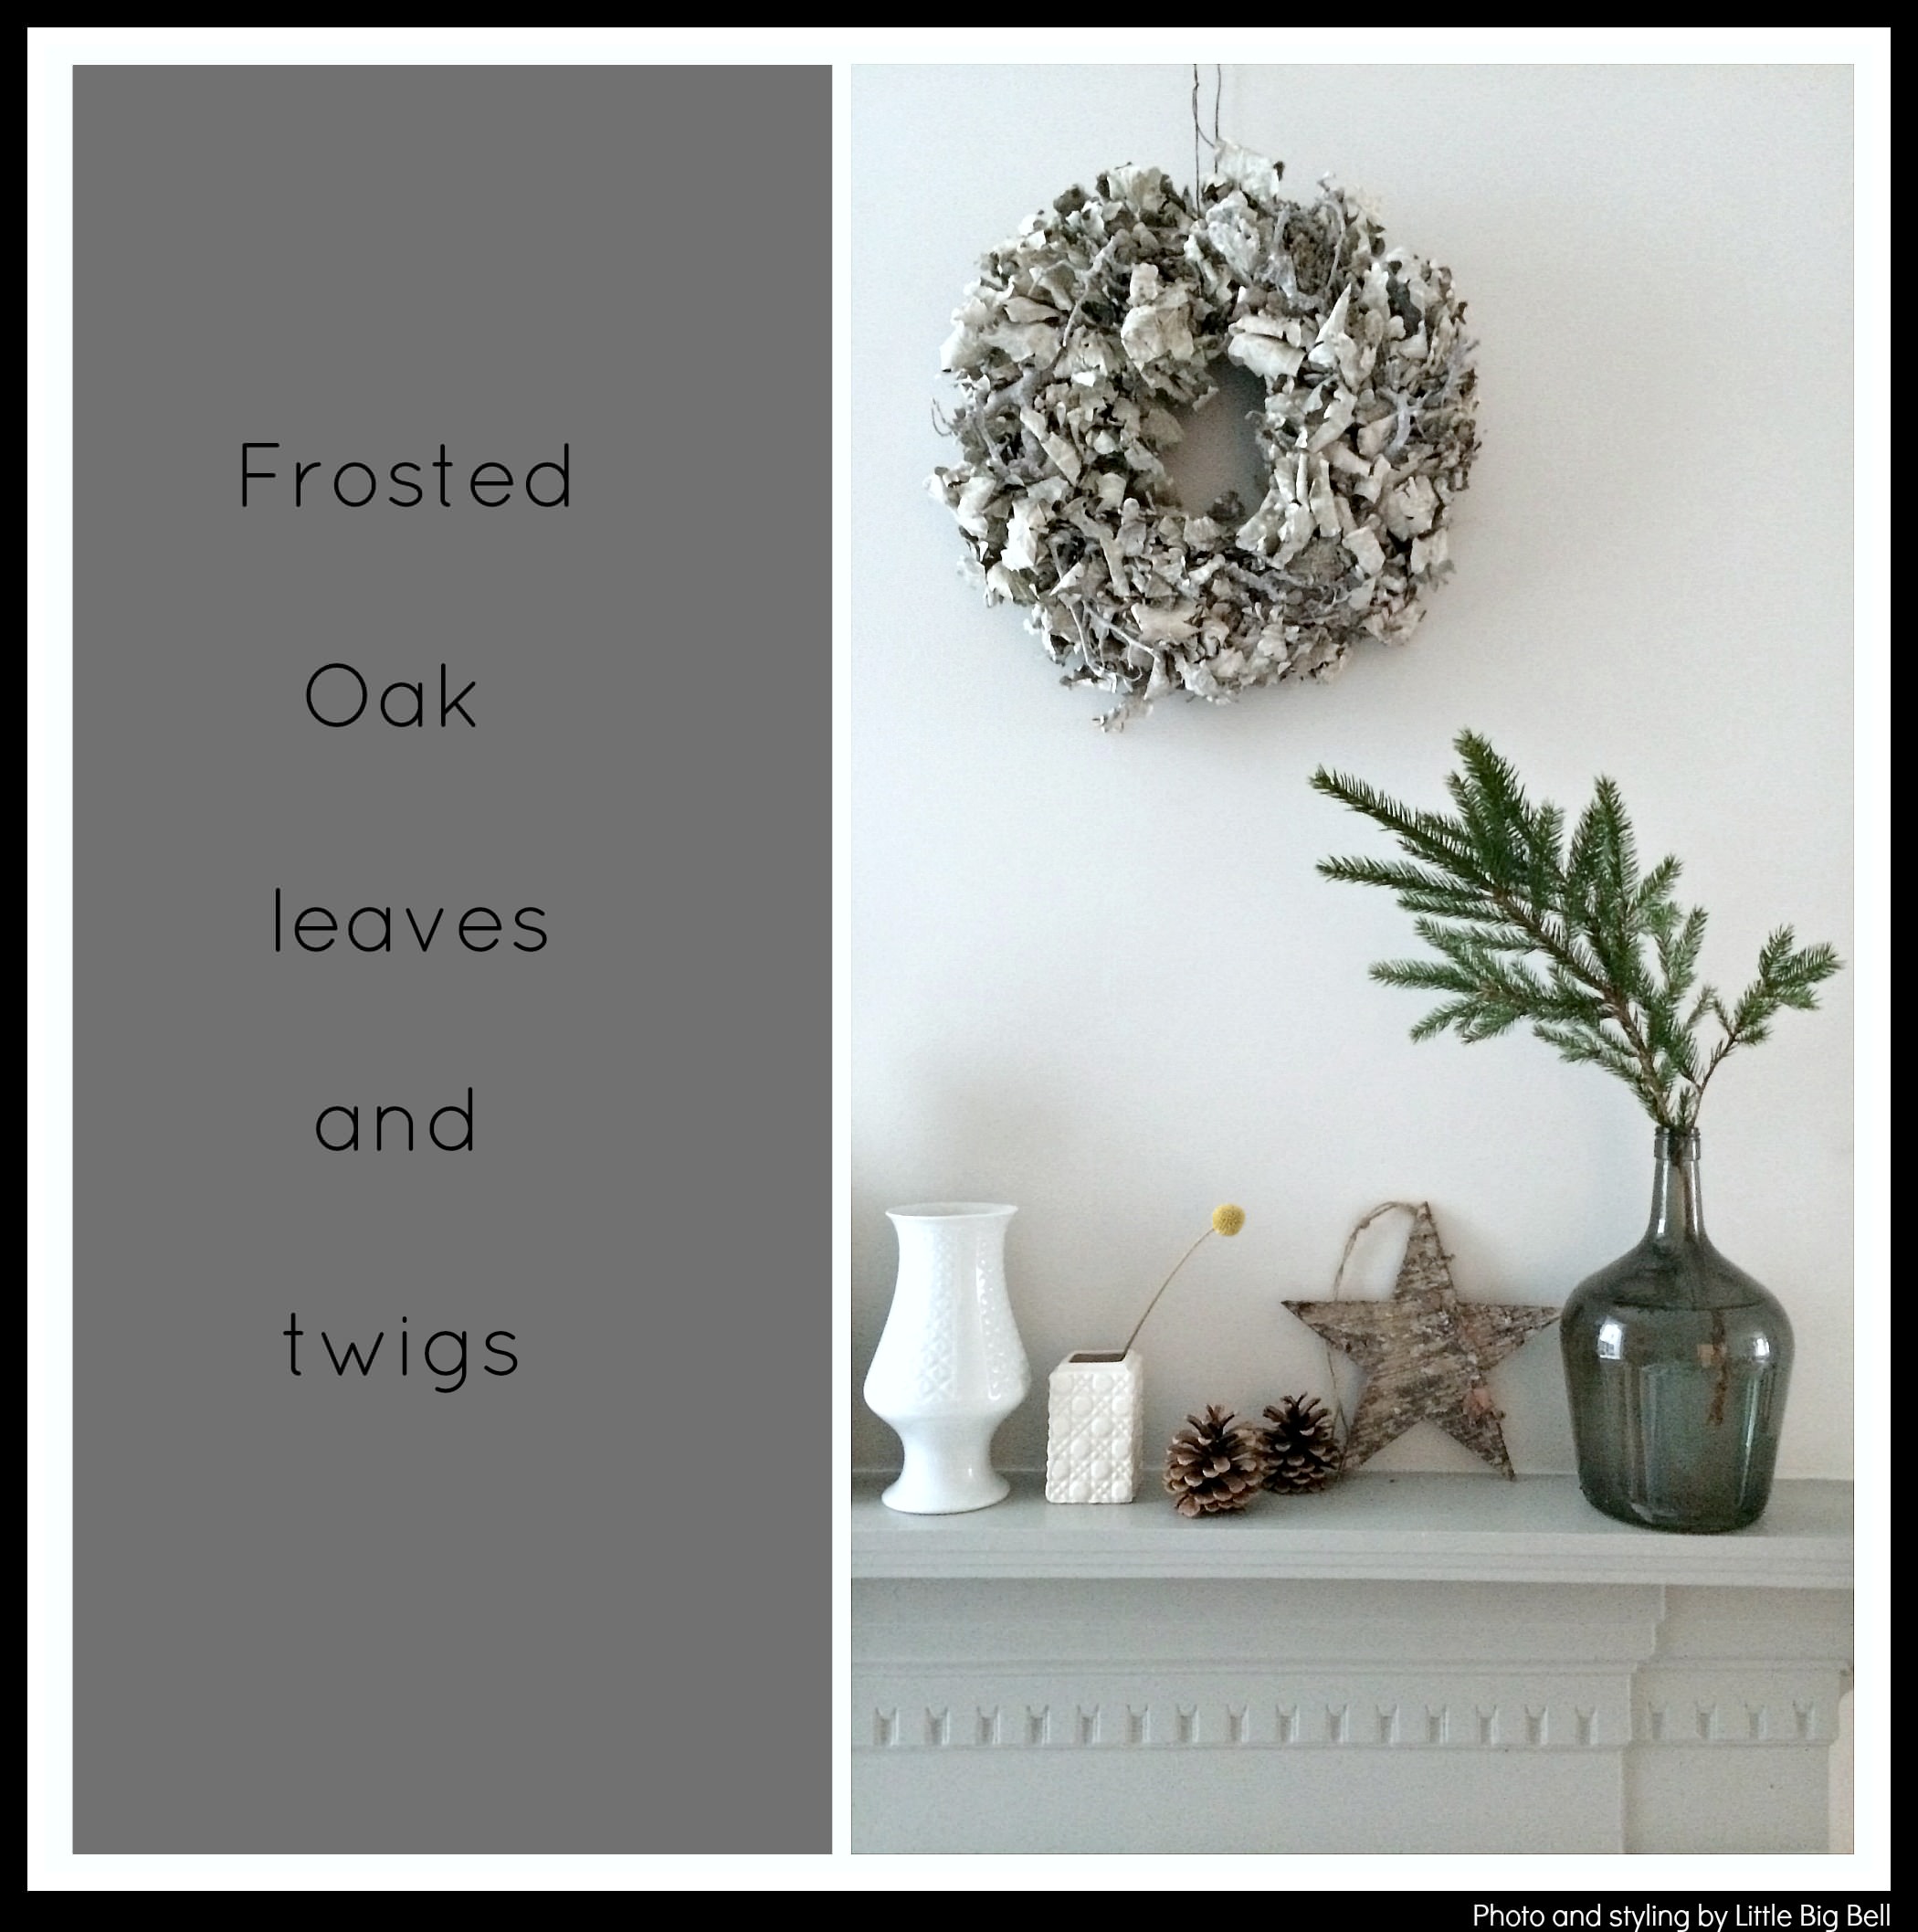 Frosted-oak-leaves-and-twigs-wreath-Little-Big-Bell